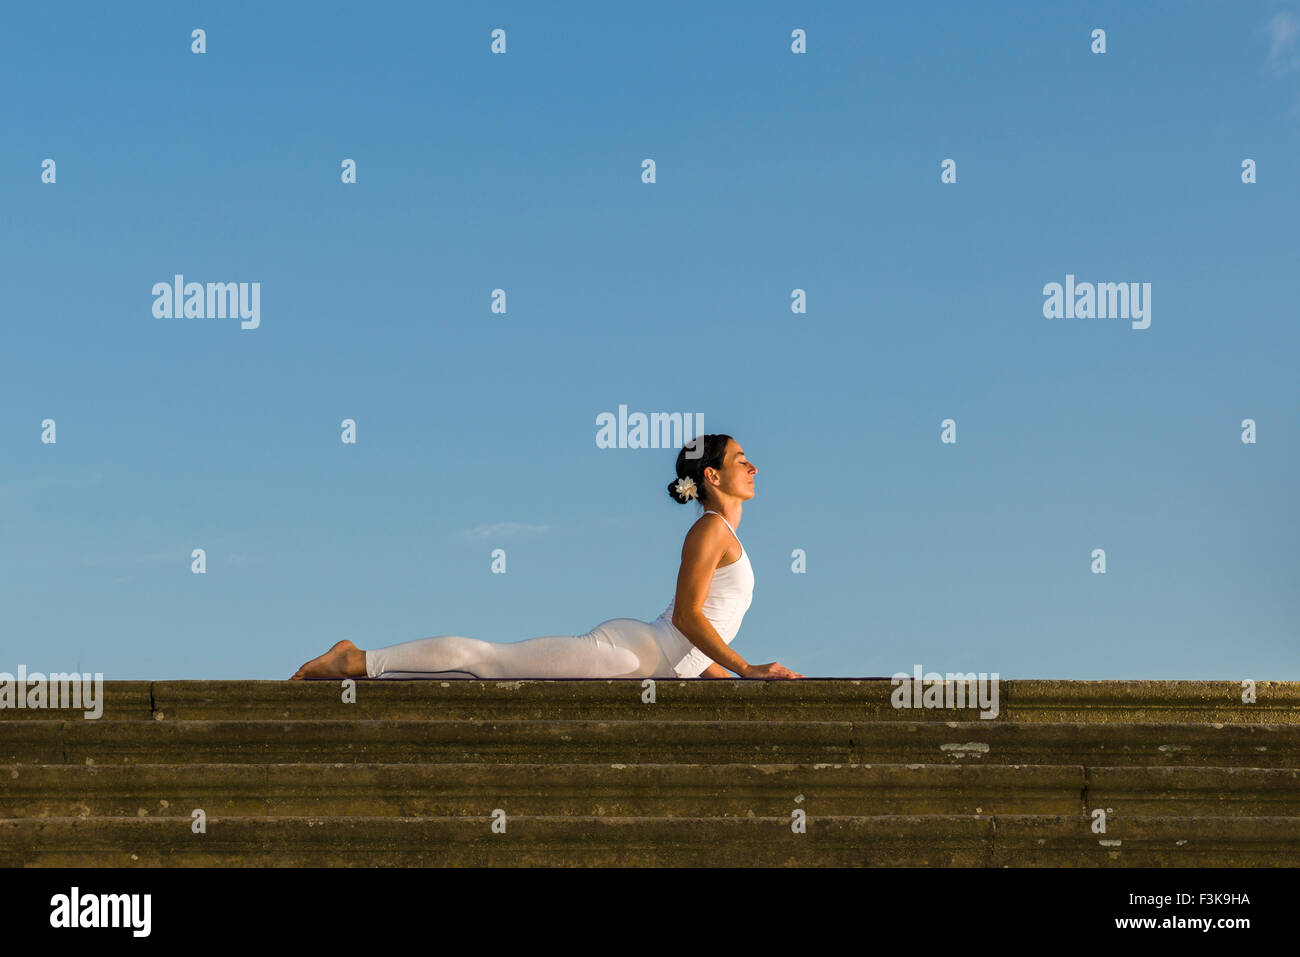 Young woman, wearing a white body suit, is practising Hatha-Yoga outdoor, showing the pose: bhujangasana, cobra pose Stock Photo